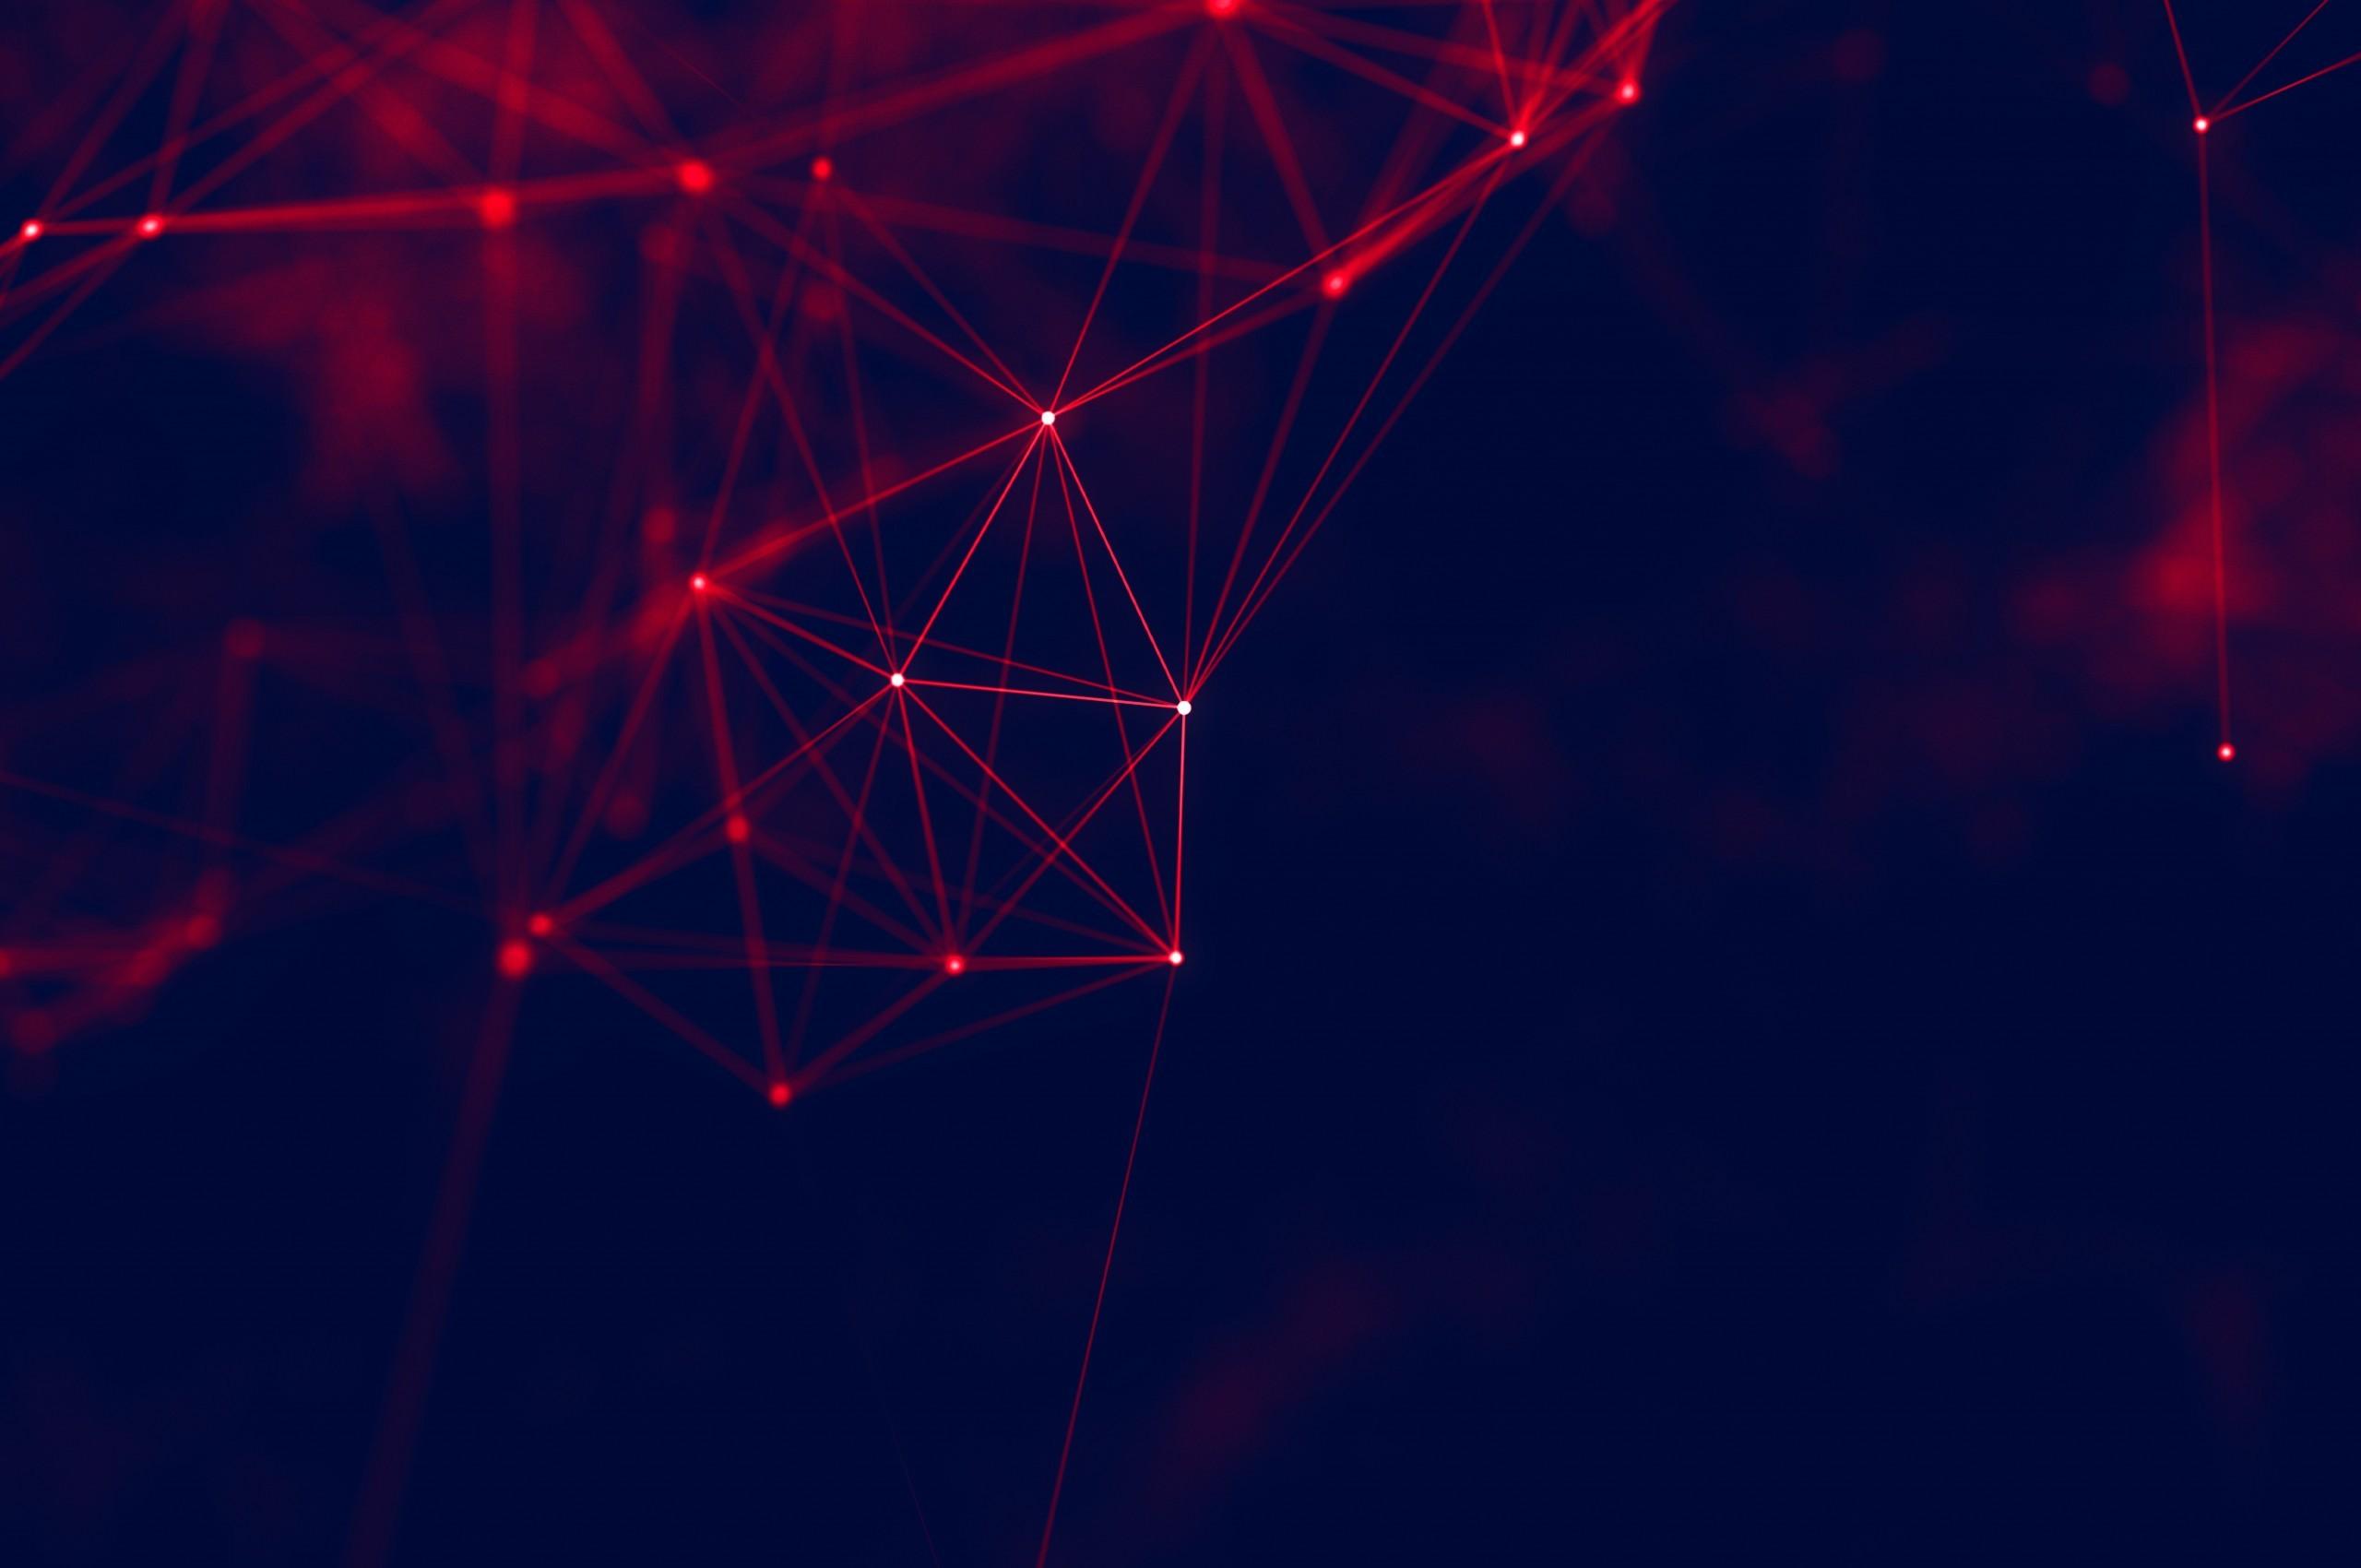 Download 2560x1700 Red Connections, Geometry, Cyberspace